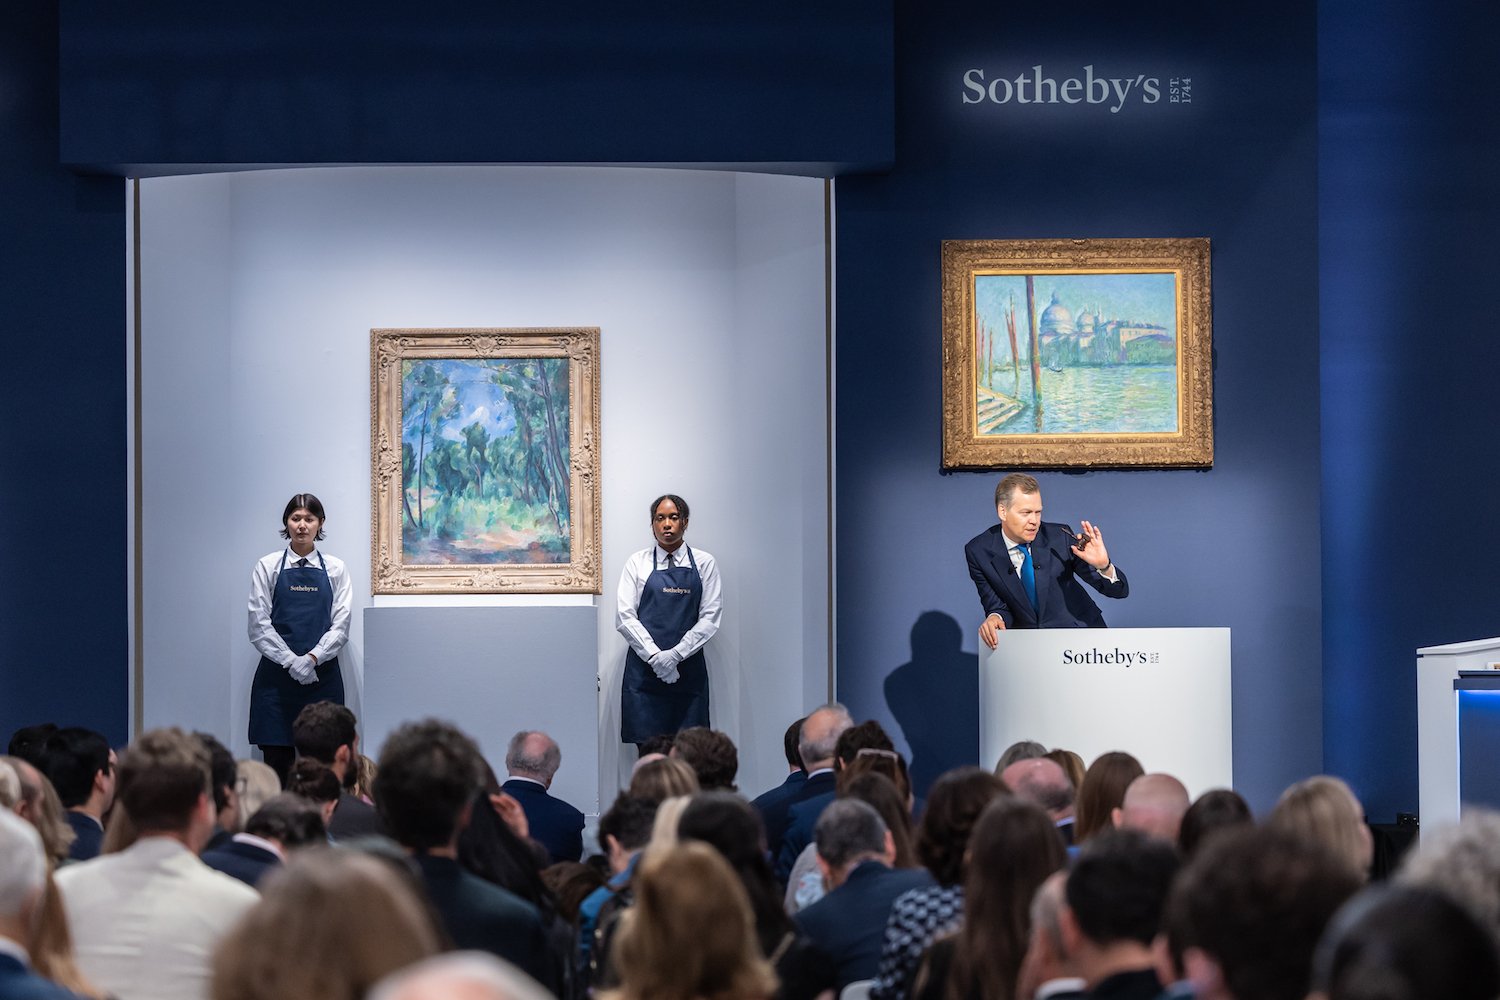 Beschikbaar lawaai ui Sotheby's Notched a Solid $408.5 Million Modern Art New York Sale Fueled by  the Reliable Churn of Blue-Chip Monets and Picassos